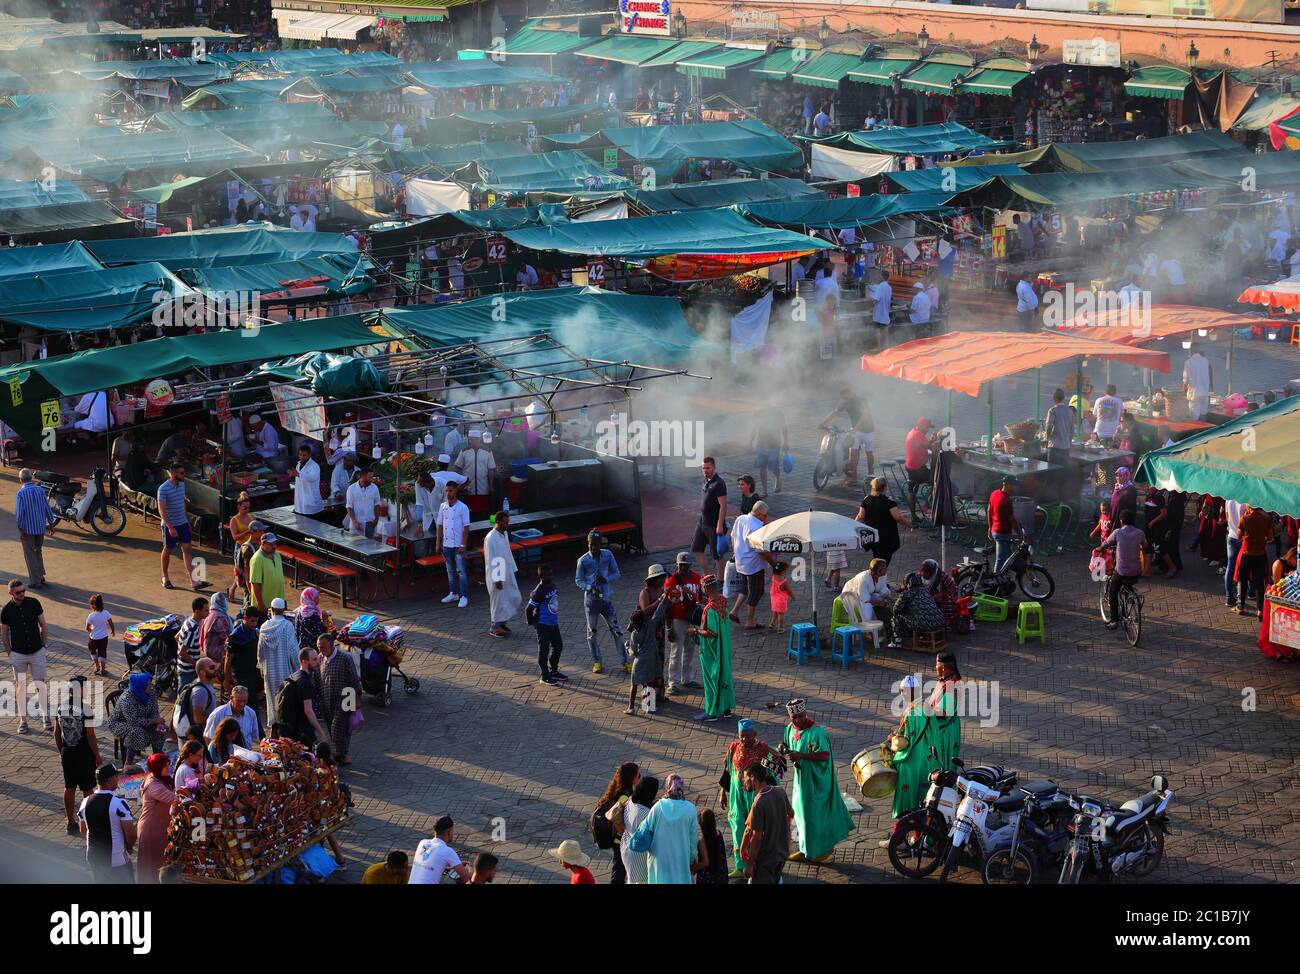 Morocco, Marrakesh - June 26, 2019: Dusk at Djemaa el Fna Square. At night the square turns into a huge open-air restaurant and hive of activity. Stock Photo